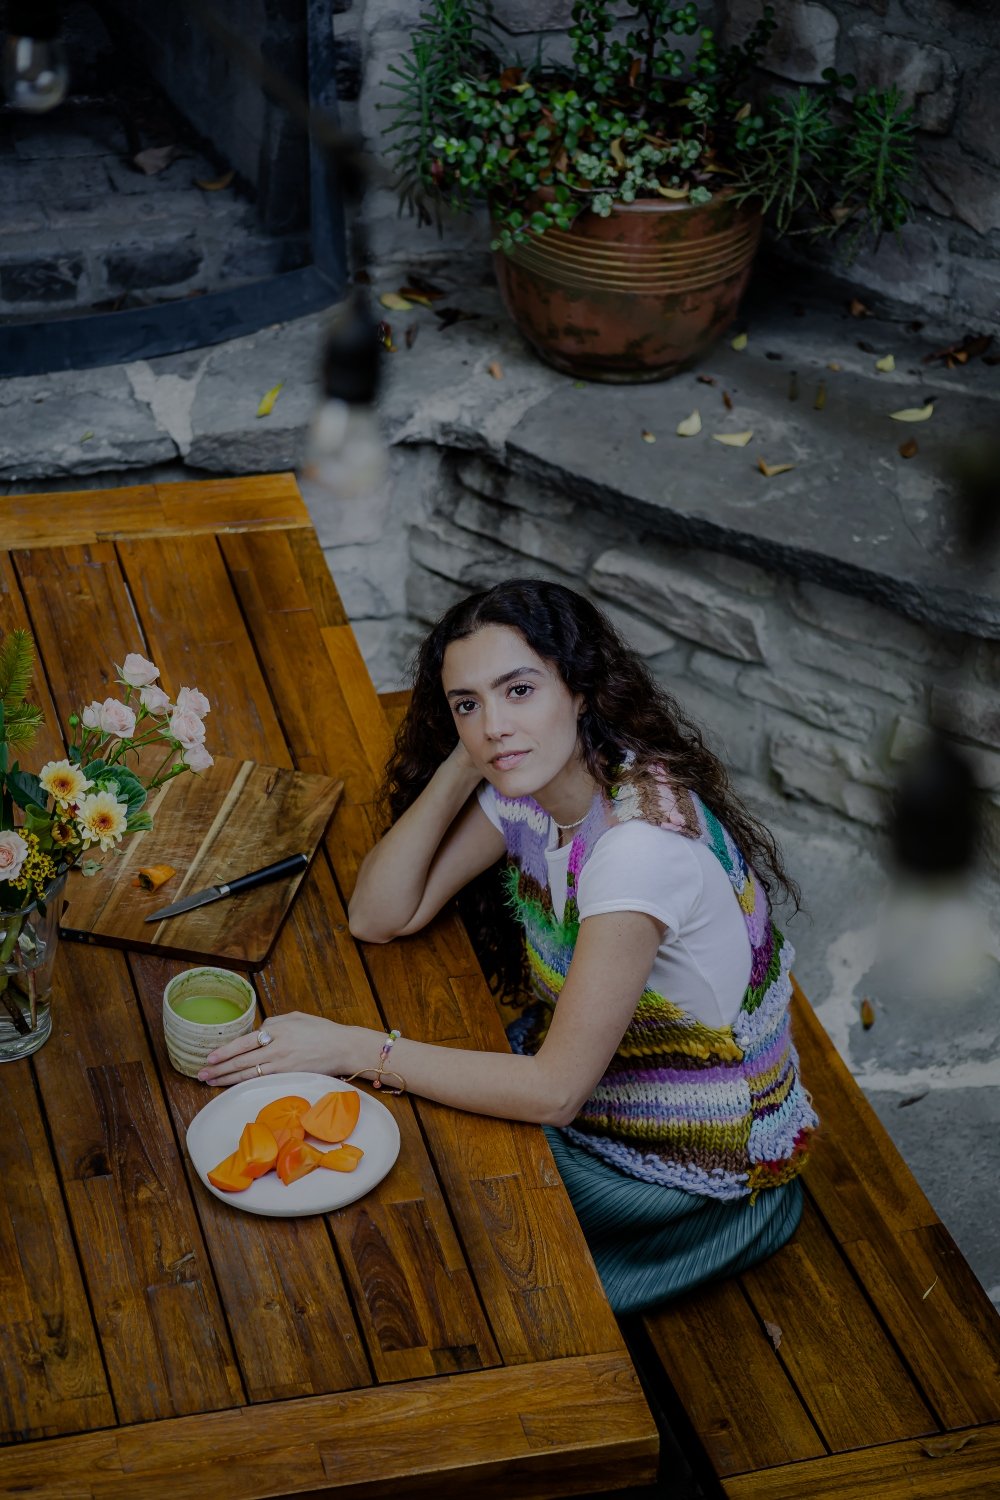 Tonya Papanikolov enjoying a healthy breakfast, holding a cup of matcha tea at a wooden table, with a plate of fresh food in front of her.